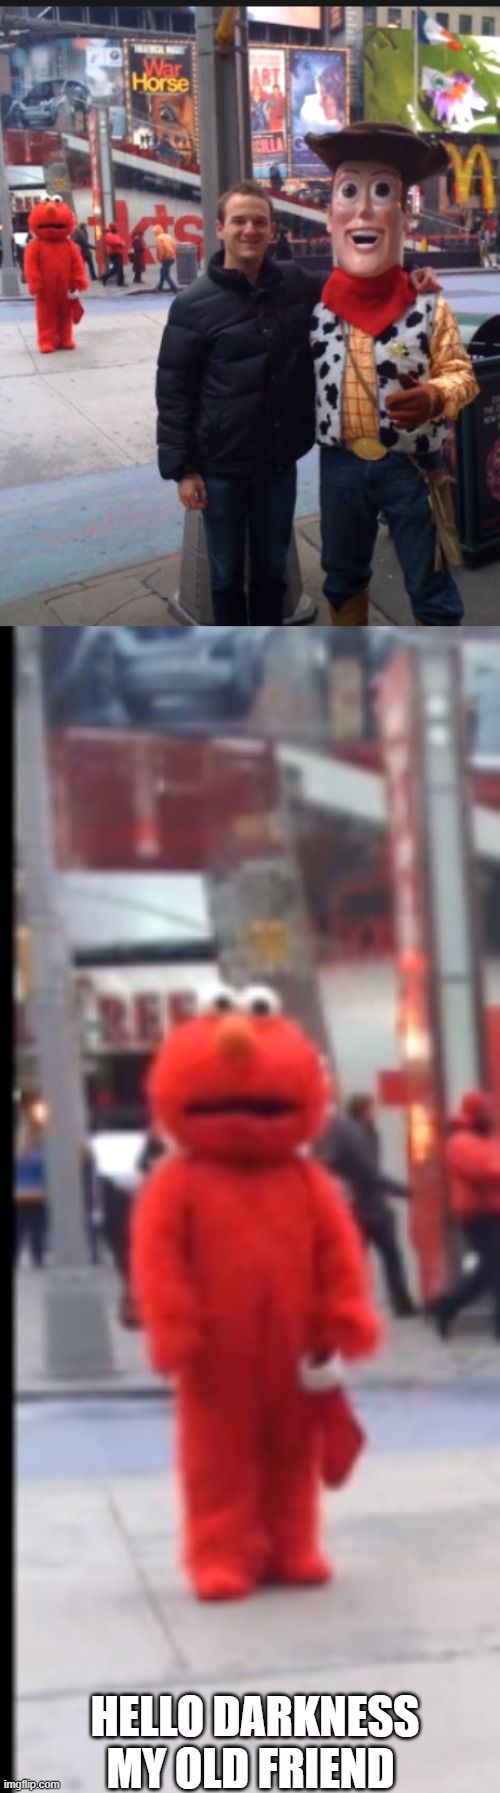 elmo | HELLO DARKNESS MY OLD FRIEND | image tagged in carhand | made w/ Imgflip meme maker